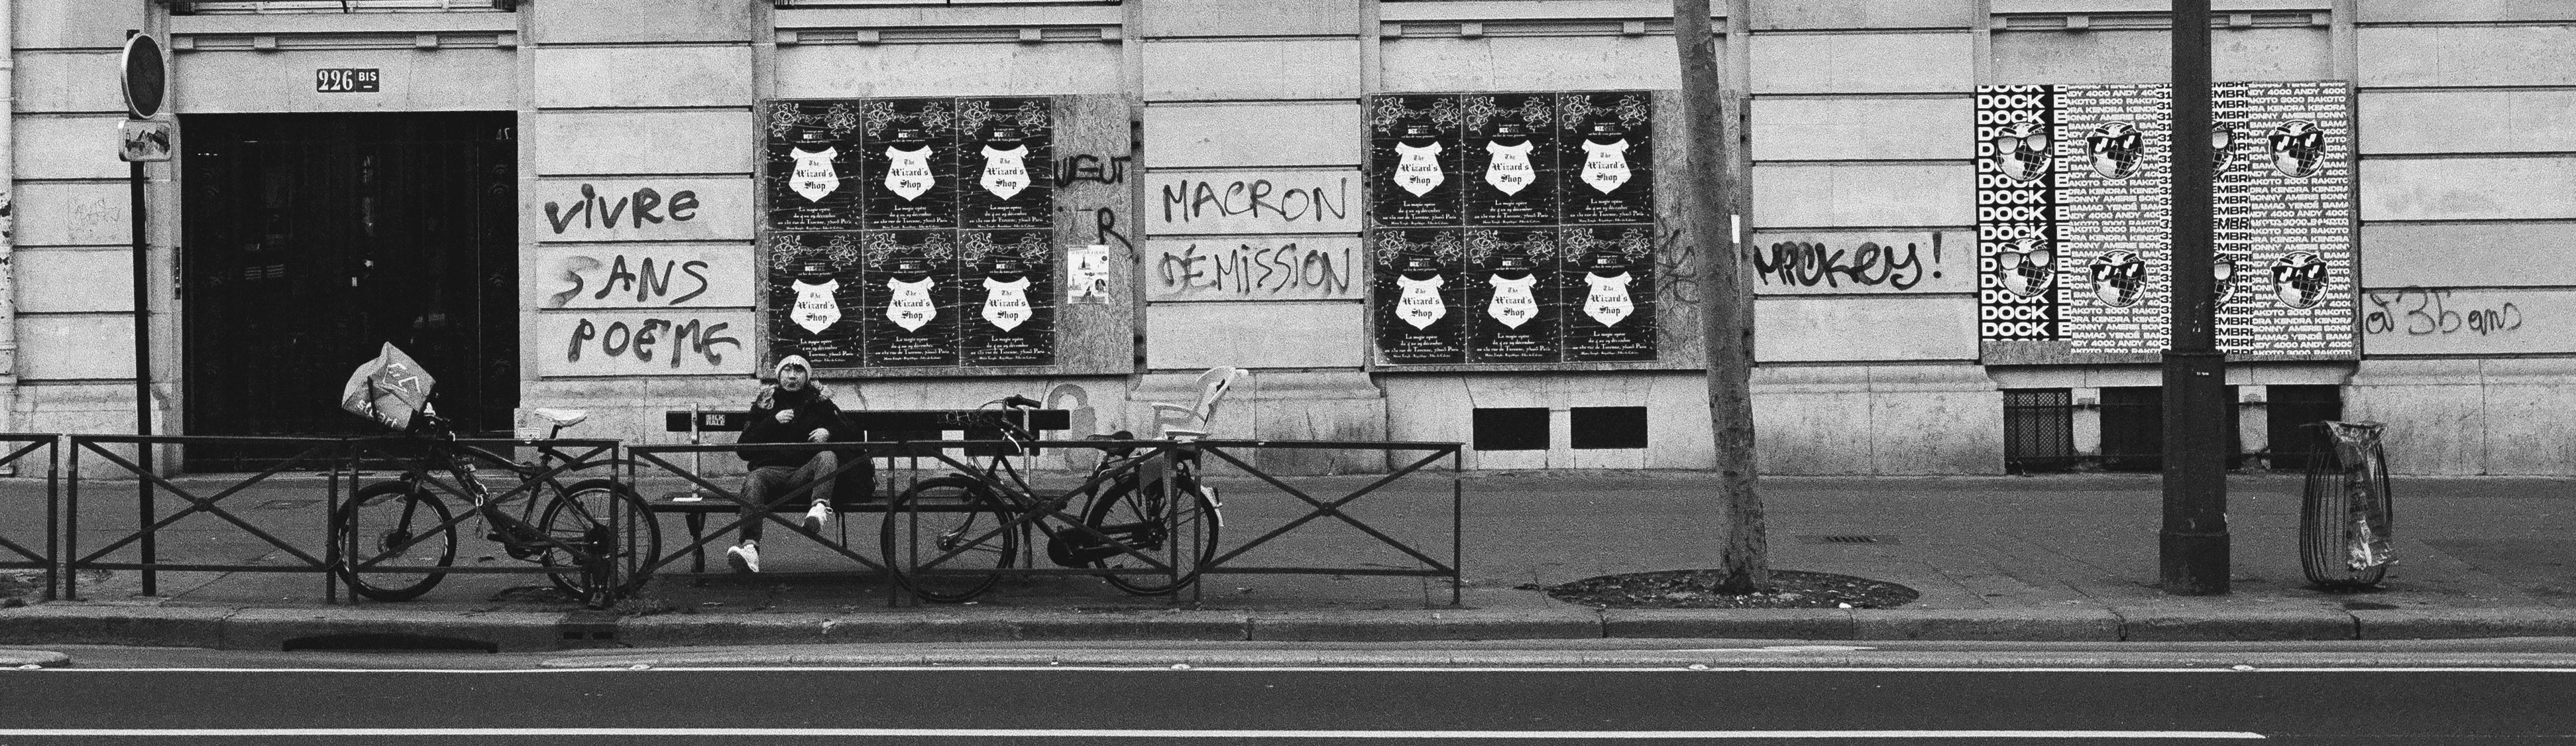 black and white photo of french street, graffiti on walls, man sitting on bench near two bicycles